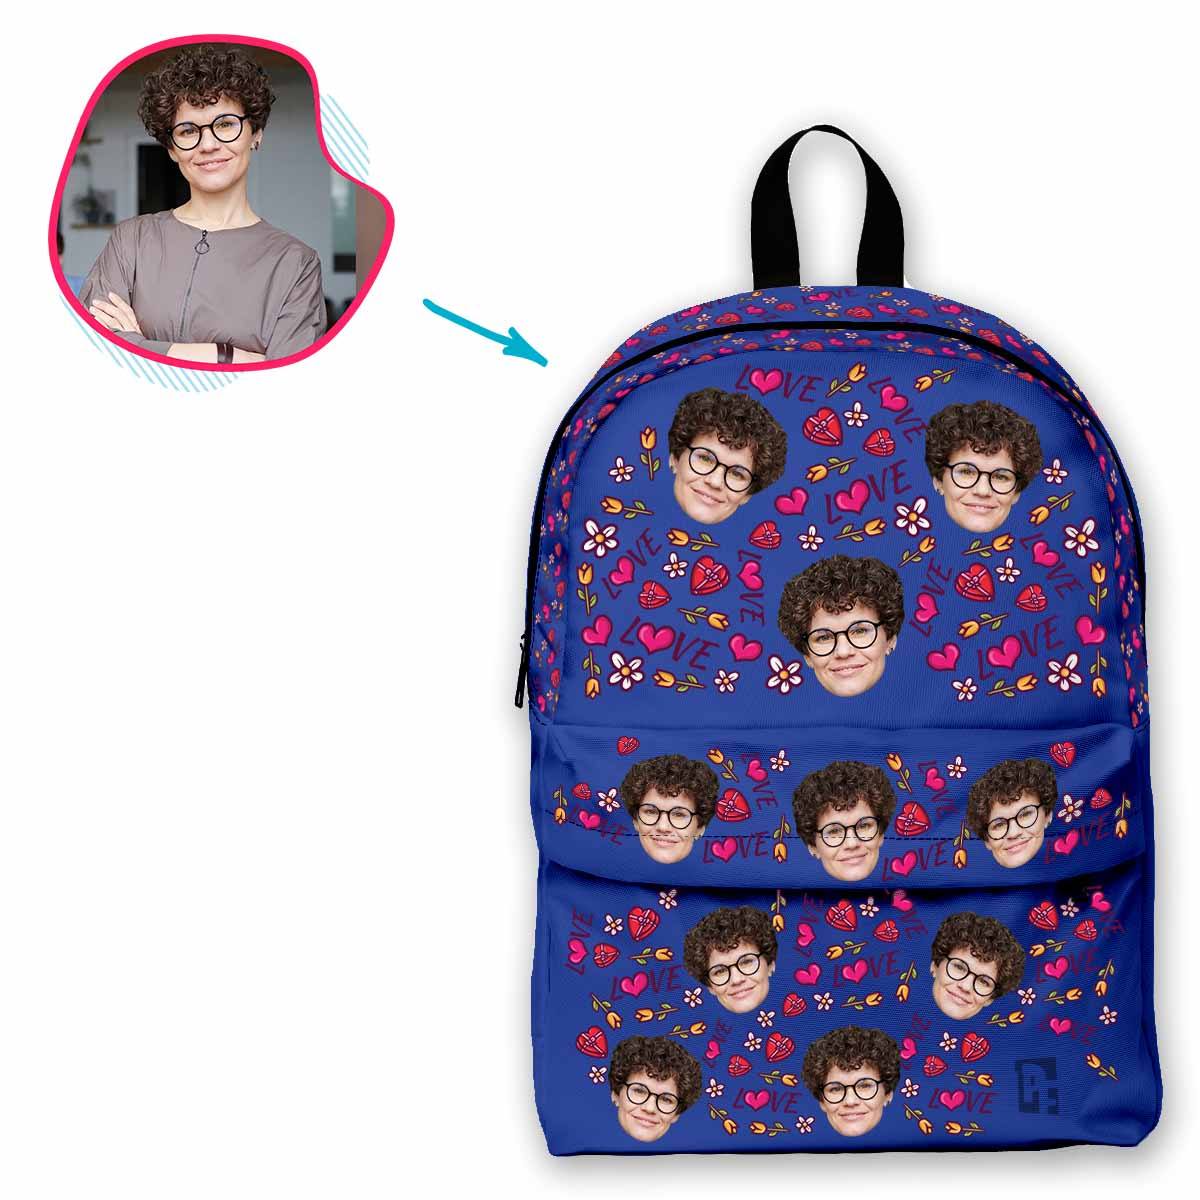 darkblue Hearts and Flowers classic backpack personalized with photo of face printed on it